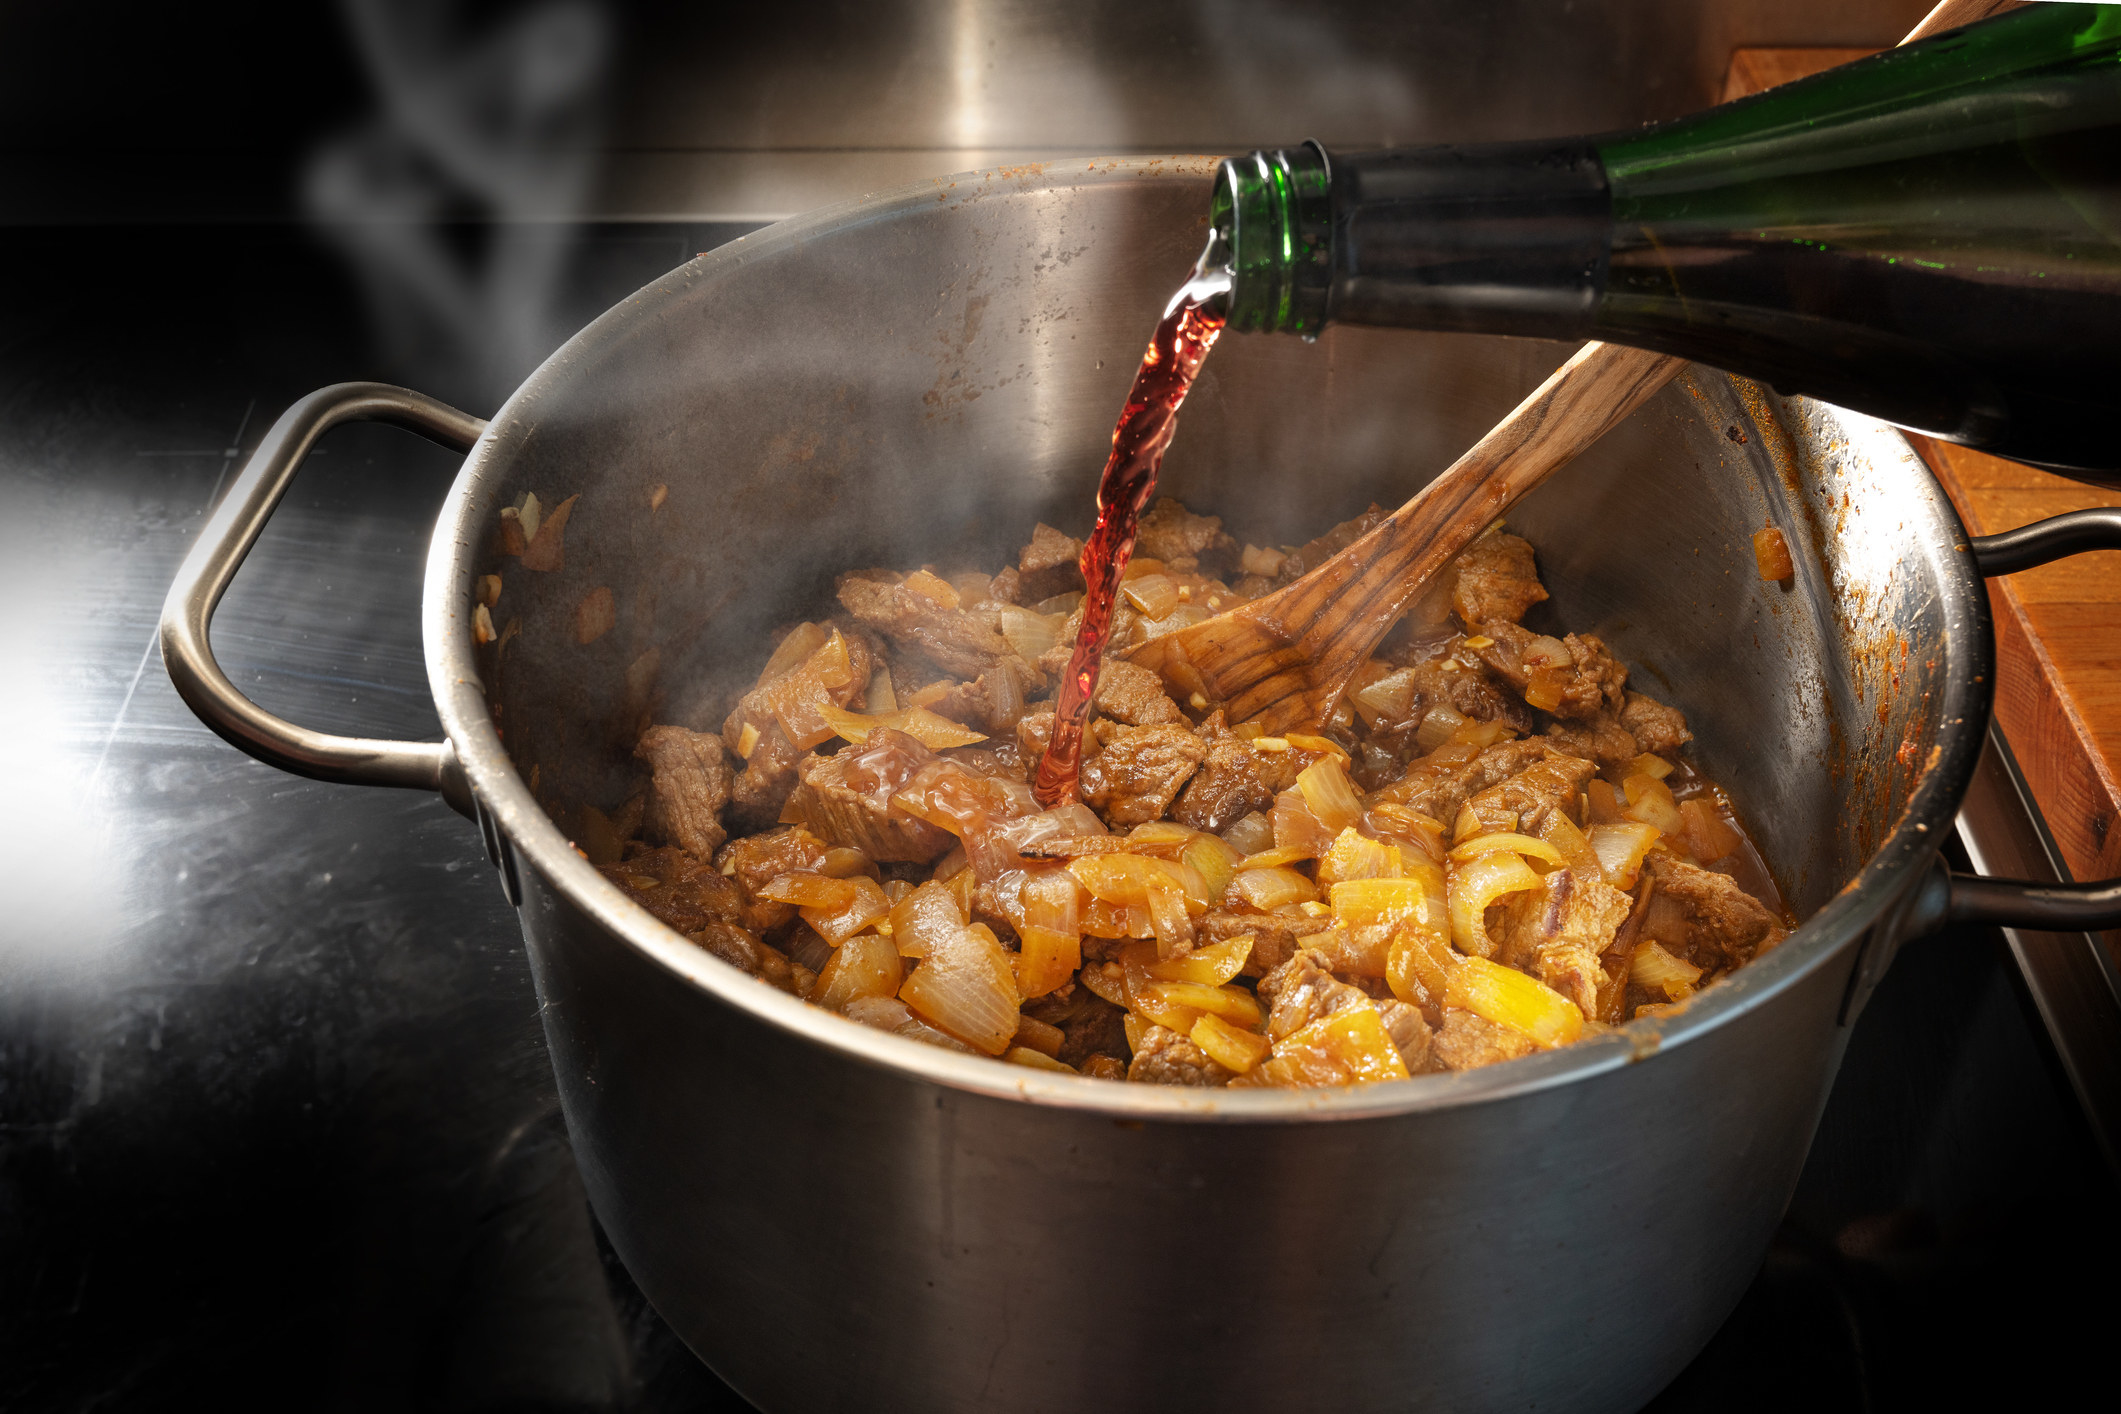 Pouring red wine into a pot of goulash.